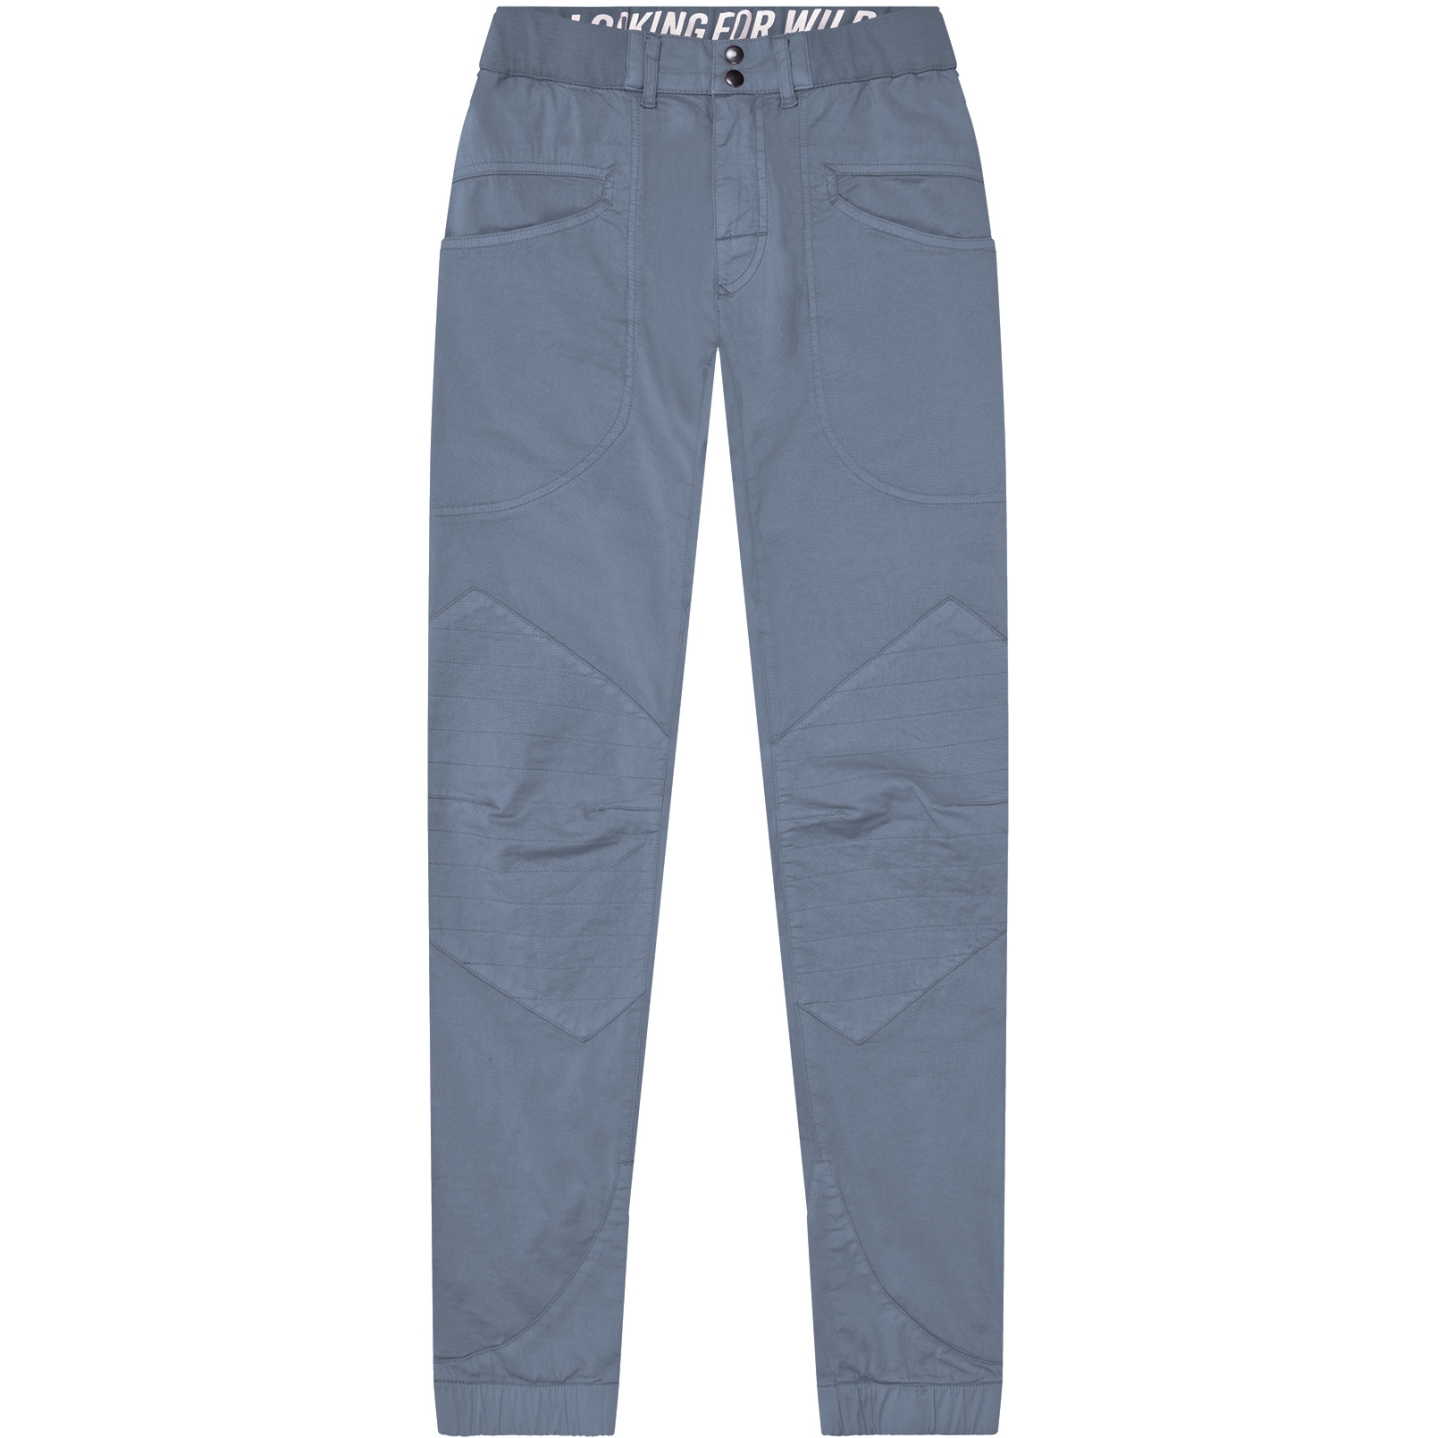 Picture of LOOKING FOR WILD Fitz Roy Men&#039;s Pants - Flint Stone